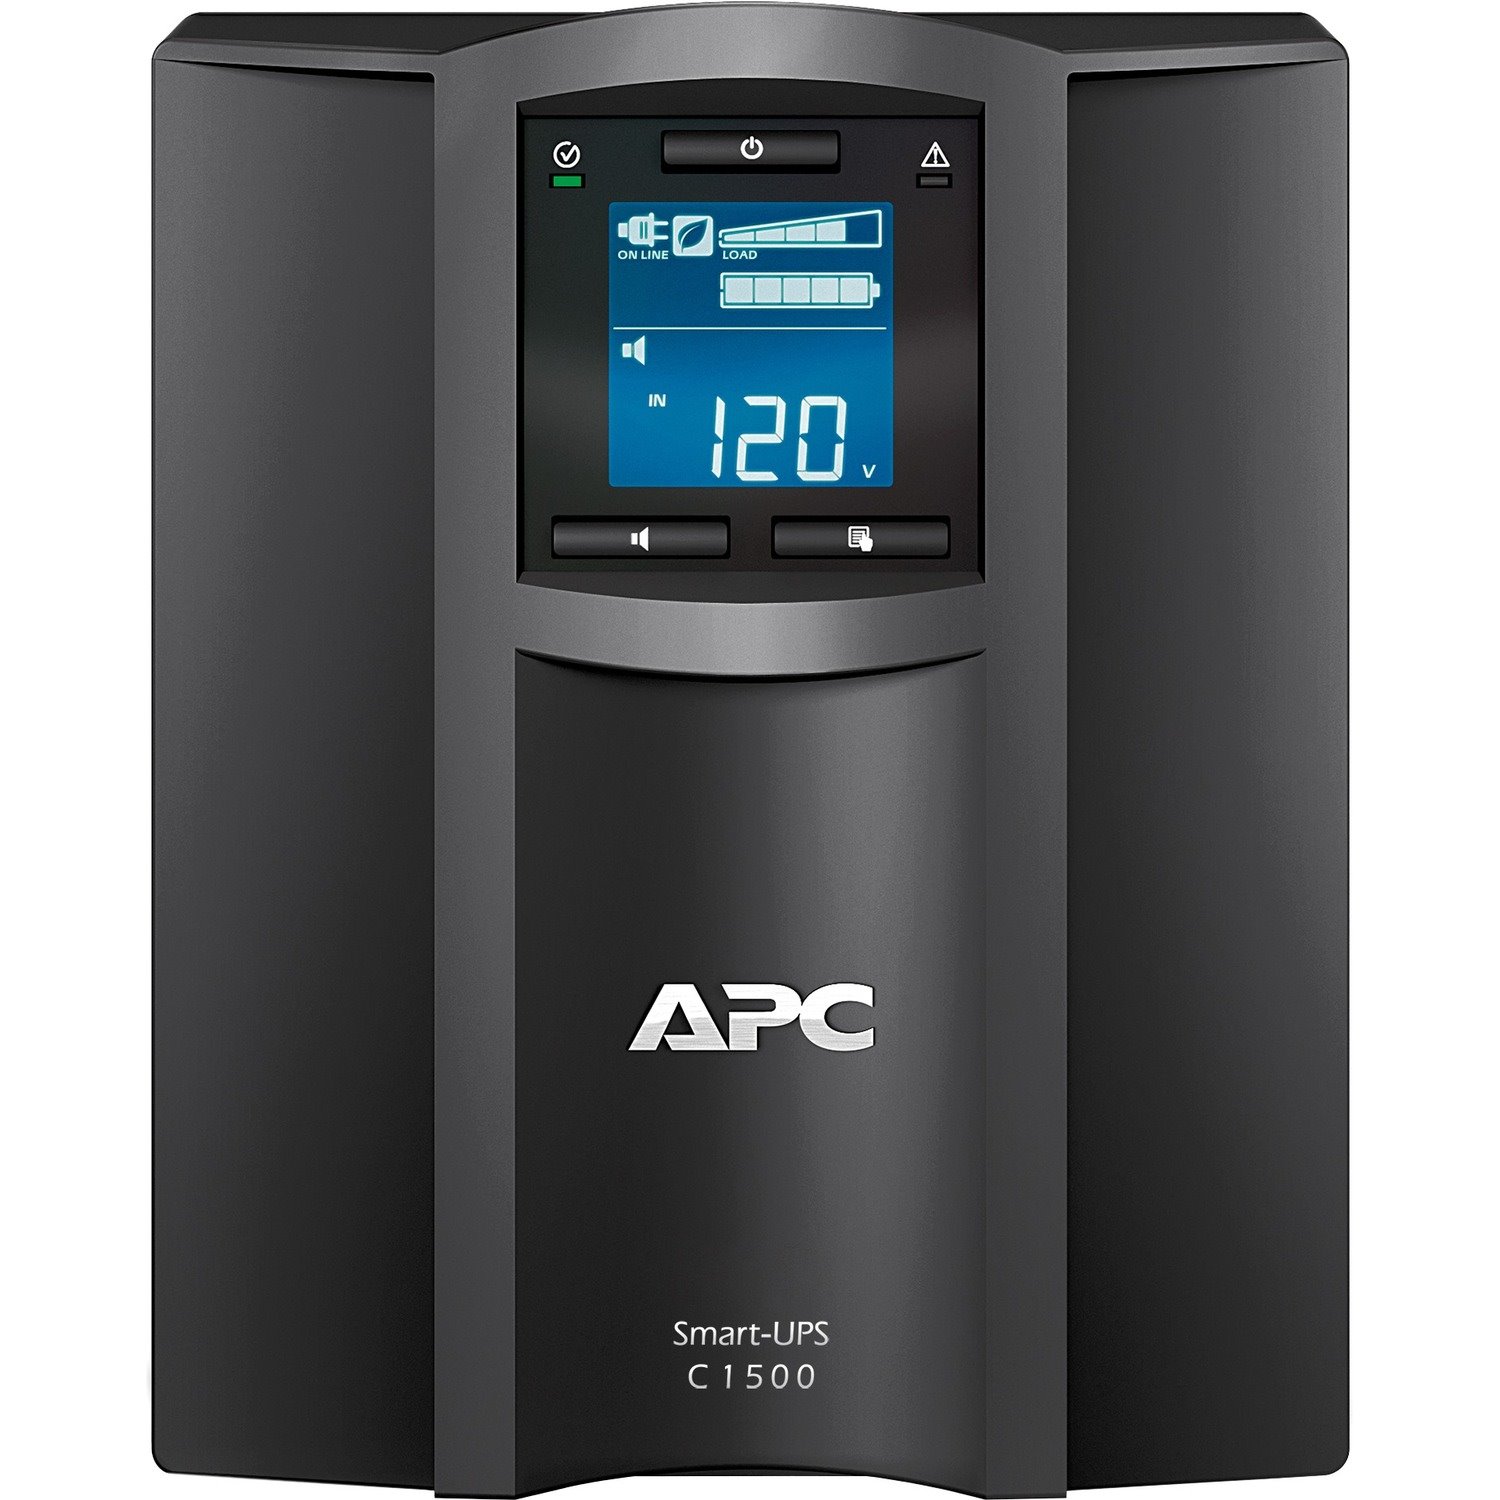 SMC1500IC - APC by Schneider Electric Smart-UPS Line-interactive UPS 1.5kVA / 900W. Includes Smart Connect